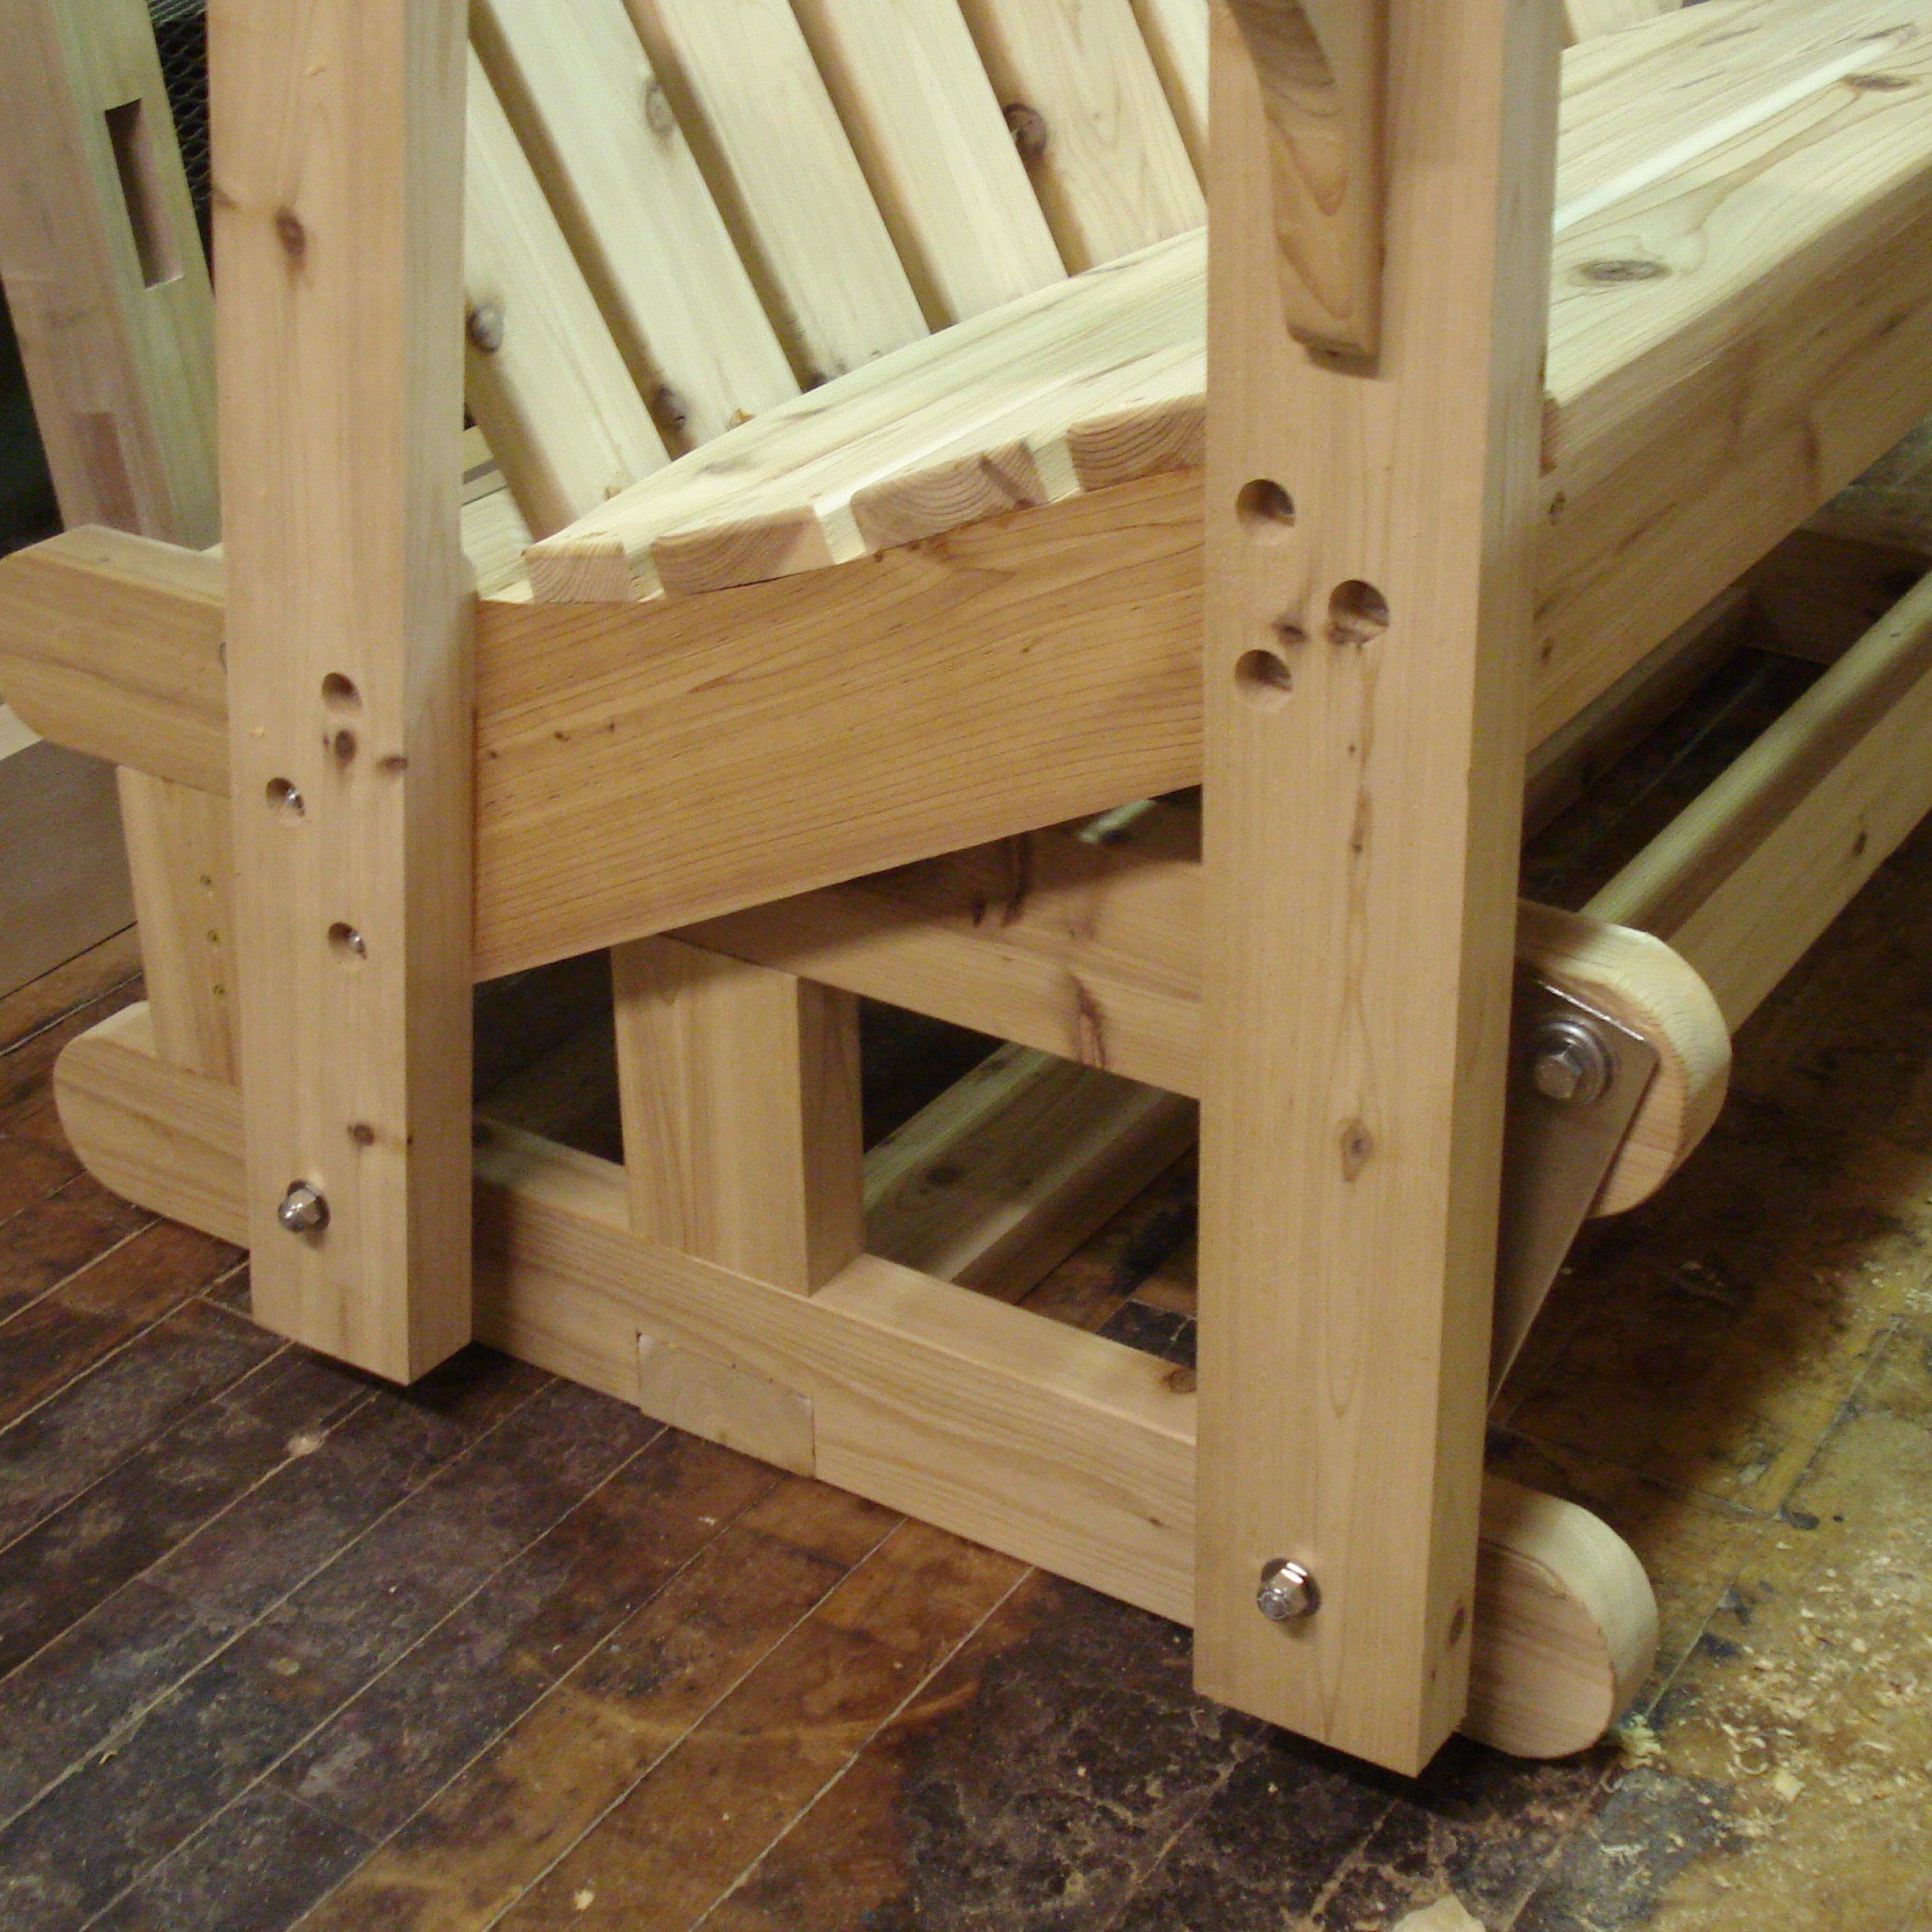 Furniture Traditional Wooden Porch Glider Design For Your Within Traditional Glider Benches (View 16 of 25)